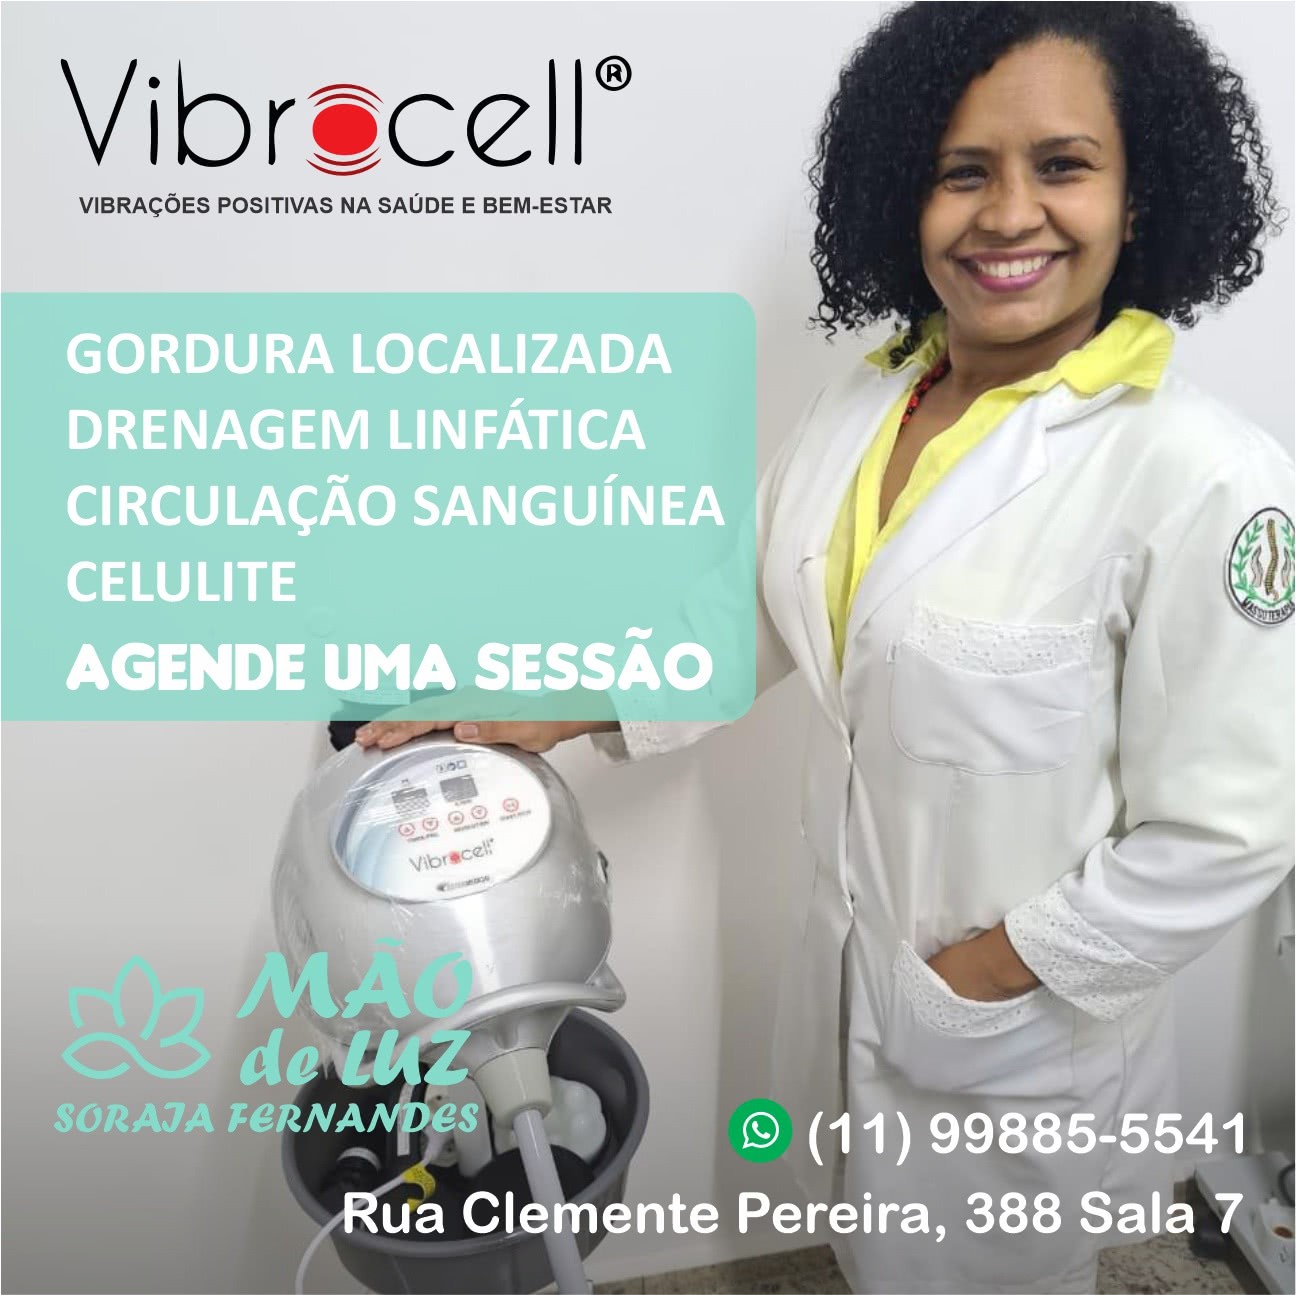 VIBROCELL